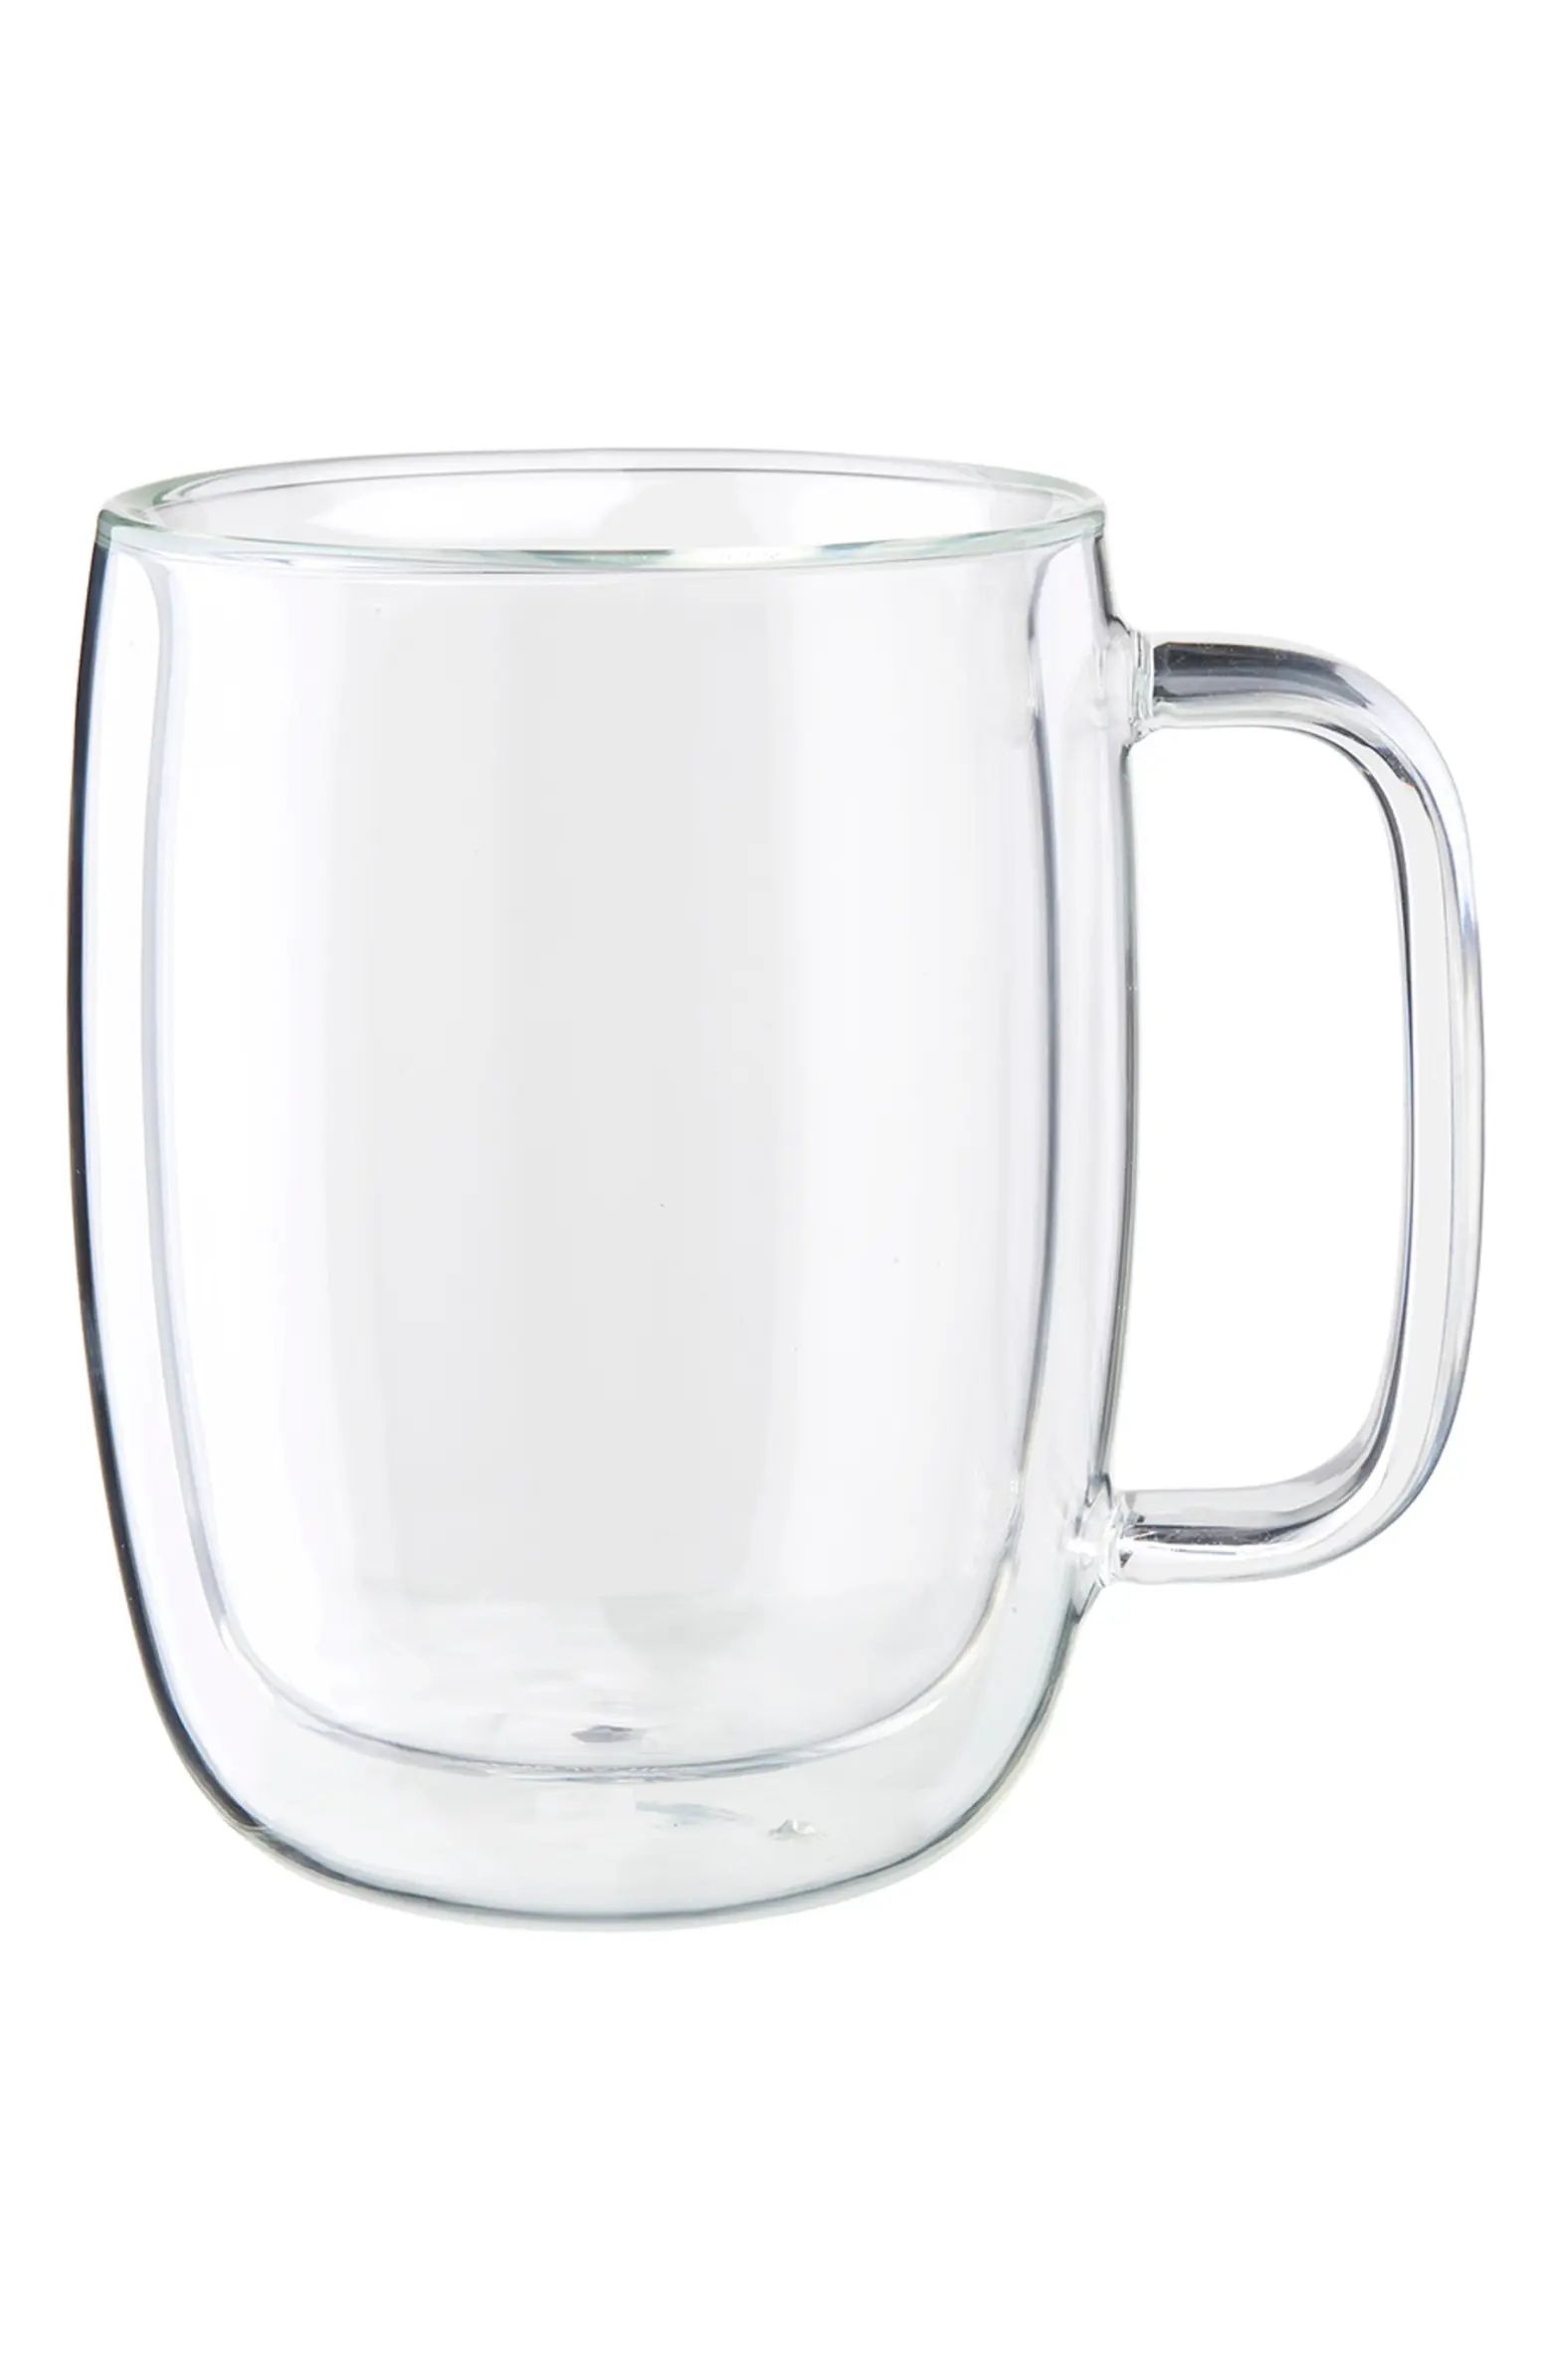 Sorrento Plus Set of 2 Double Wall Glass Latte Mugs | Nordstrom